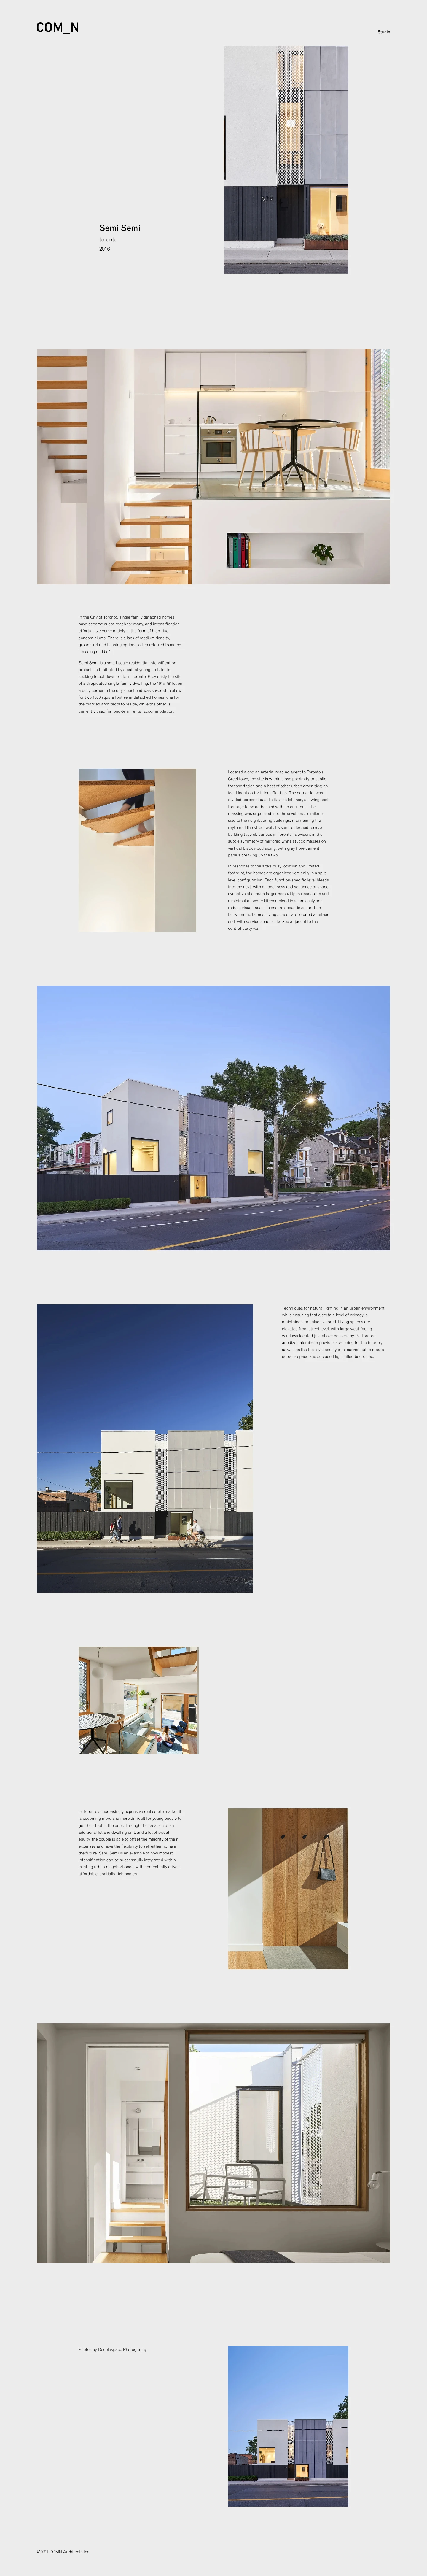 COMN Architects Landing Page Example: COMN Architects is an award winning design firm practicing architecture and interior design. Based in Toronto, the studio specializes in commercial and residential projects.